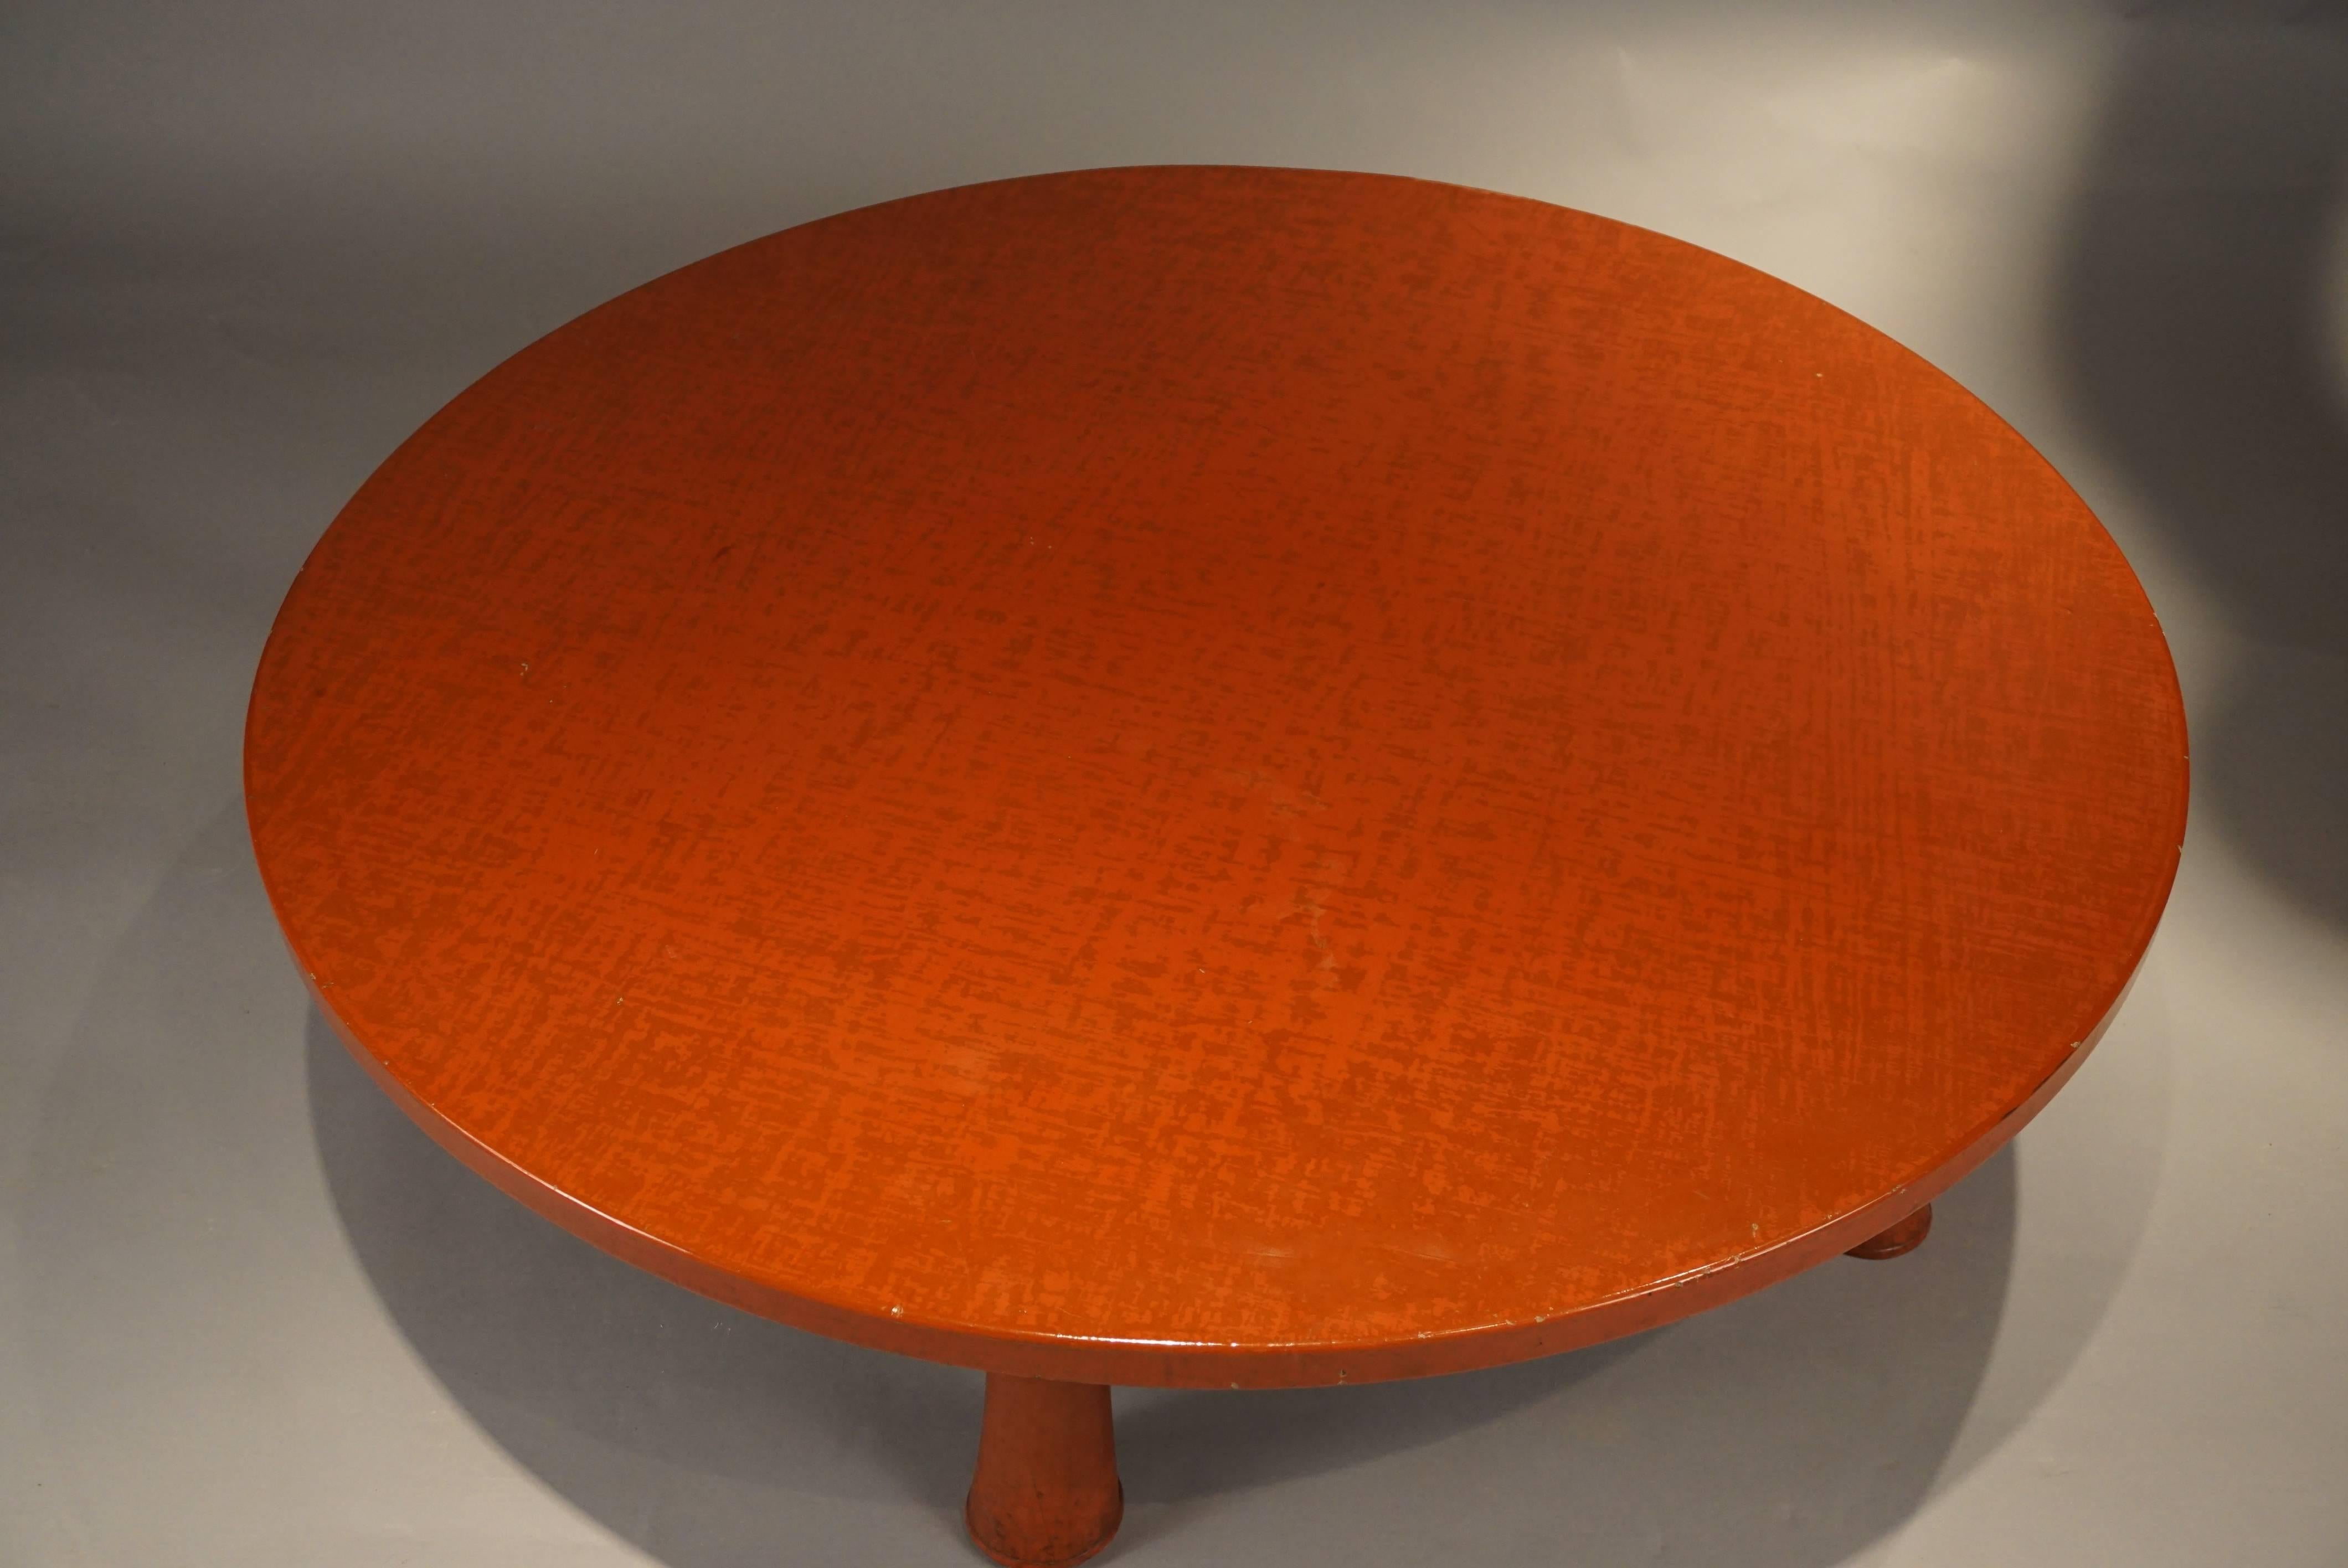 Asian inspired with Mid-Century Modern roots. Beautiful orange/red lacquer.
Large in scale with a 48 inch diameter top. The five legs create sturdy support
allowing the table to be used as a bench.